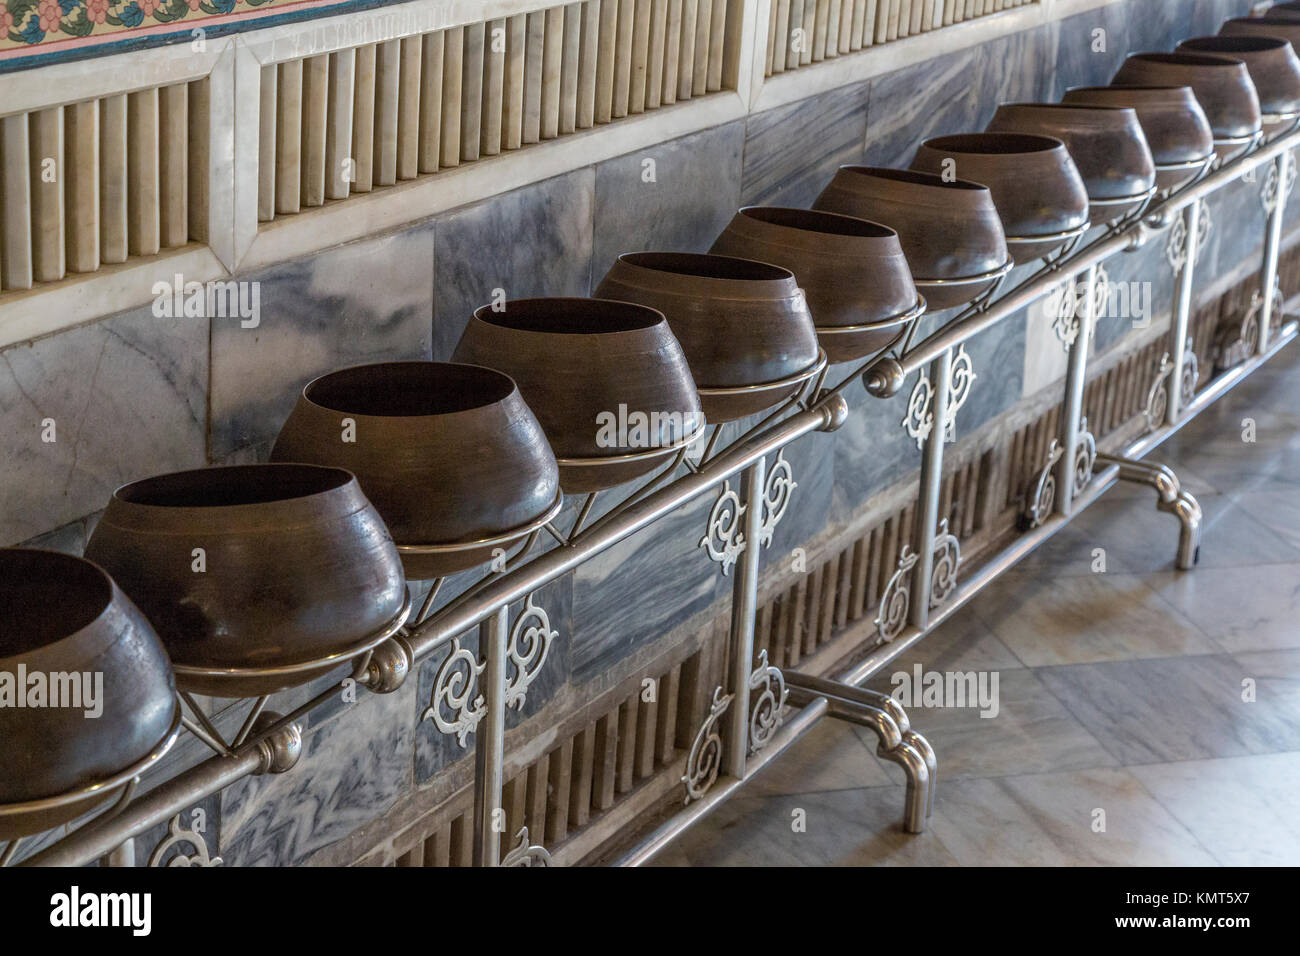 Bangkok, Thailand.  Wat Pho Temple.   Pots for Receiving Coins from Worshipers Seeking Blessings or Good Fortune. Stock Photo